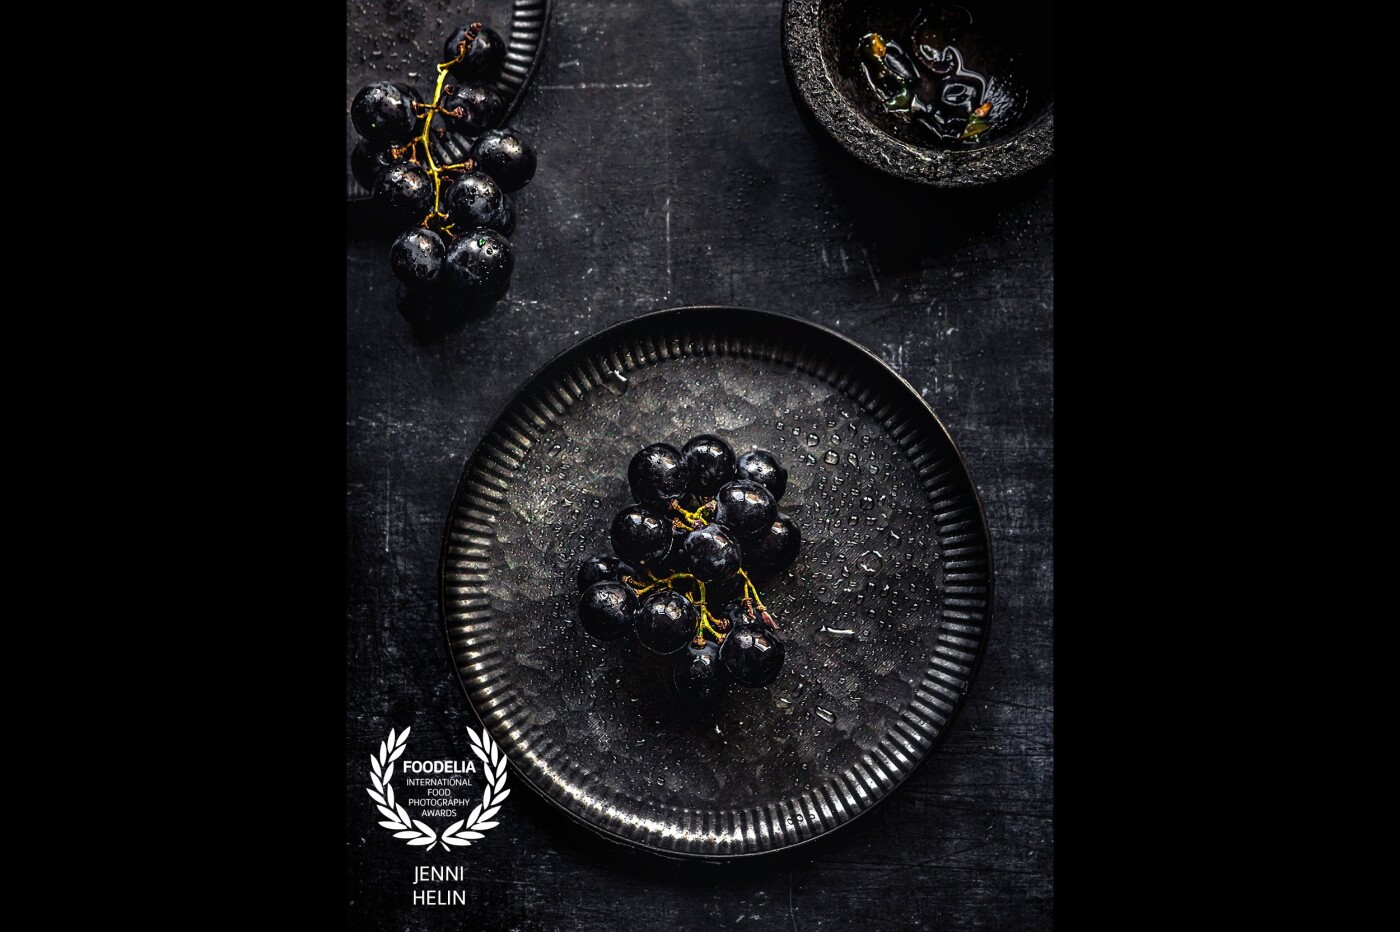 This image is part of my personal creative series - all about fruit. I wanted to celebrate monochromic Food Styling with blacks and greys. This was taken in my small studio in the UK just by using natural light.